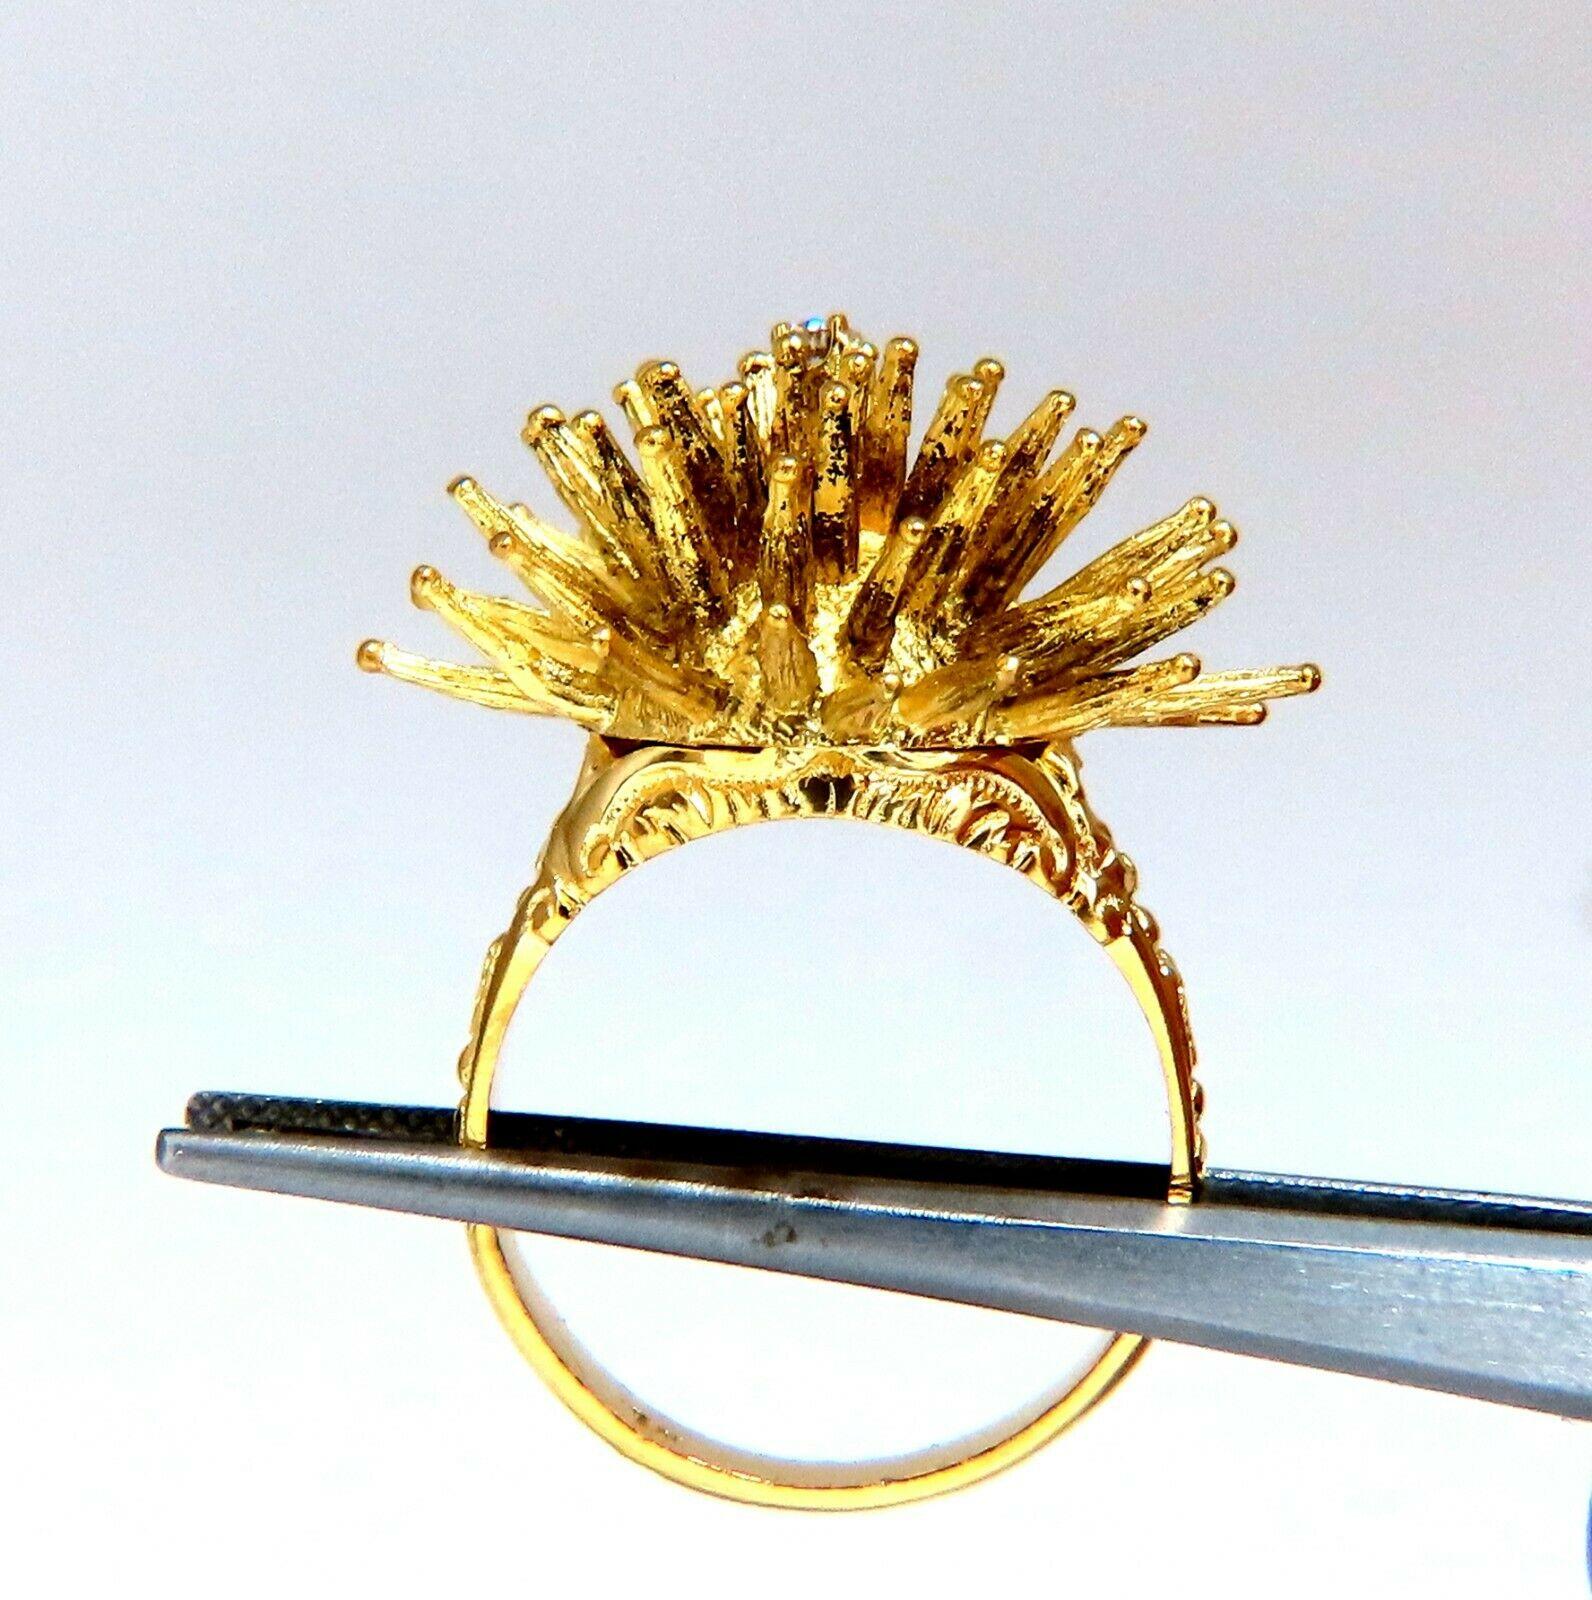 Corona Starburst Tactical Ring

.10ct natural round diamond

G-color vs2 clarity

18kt yellow gold

18.5 grams

Deck: 28 x 30mm

Depth: 15mm

$6000 Appraisal to Accompany